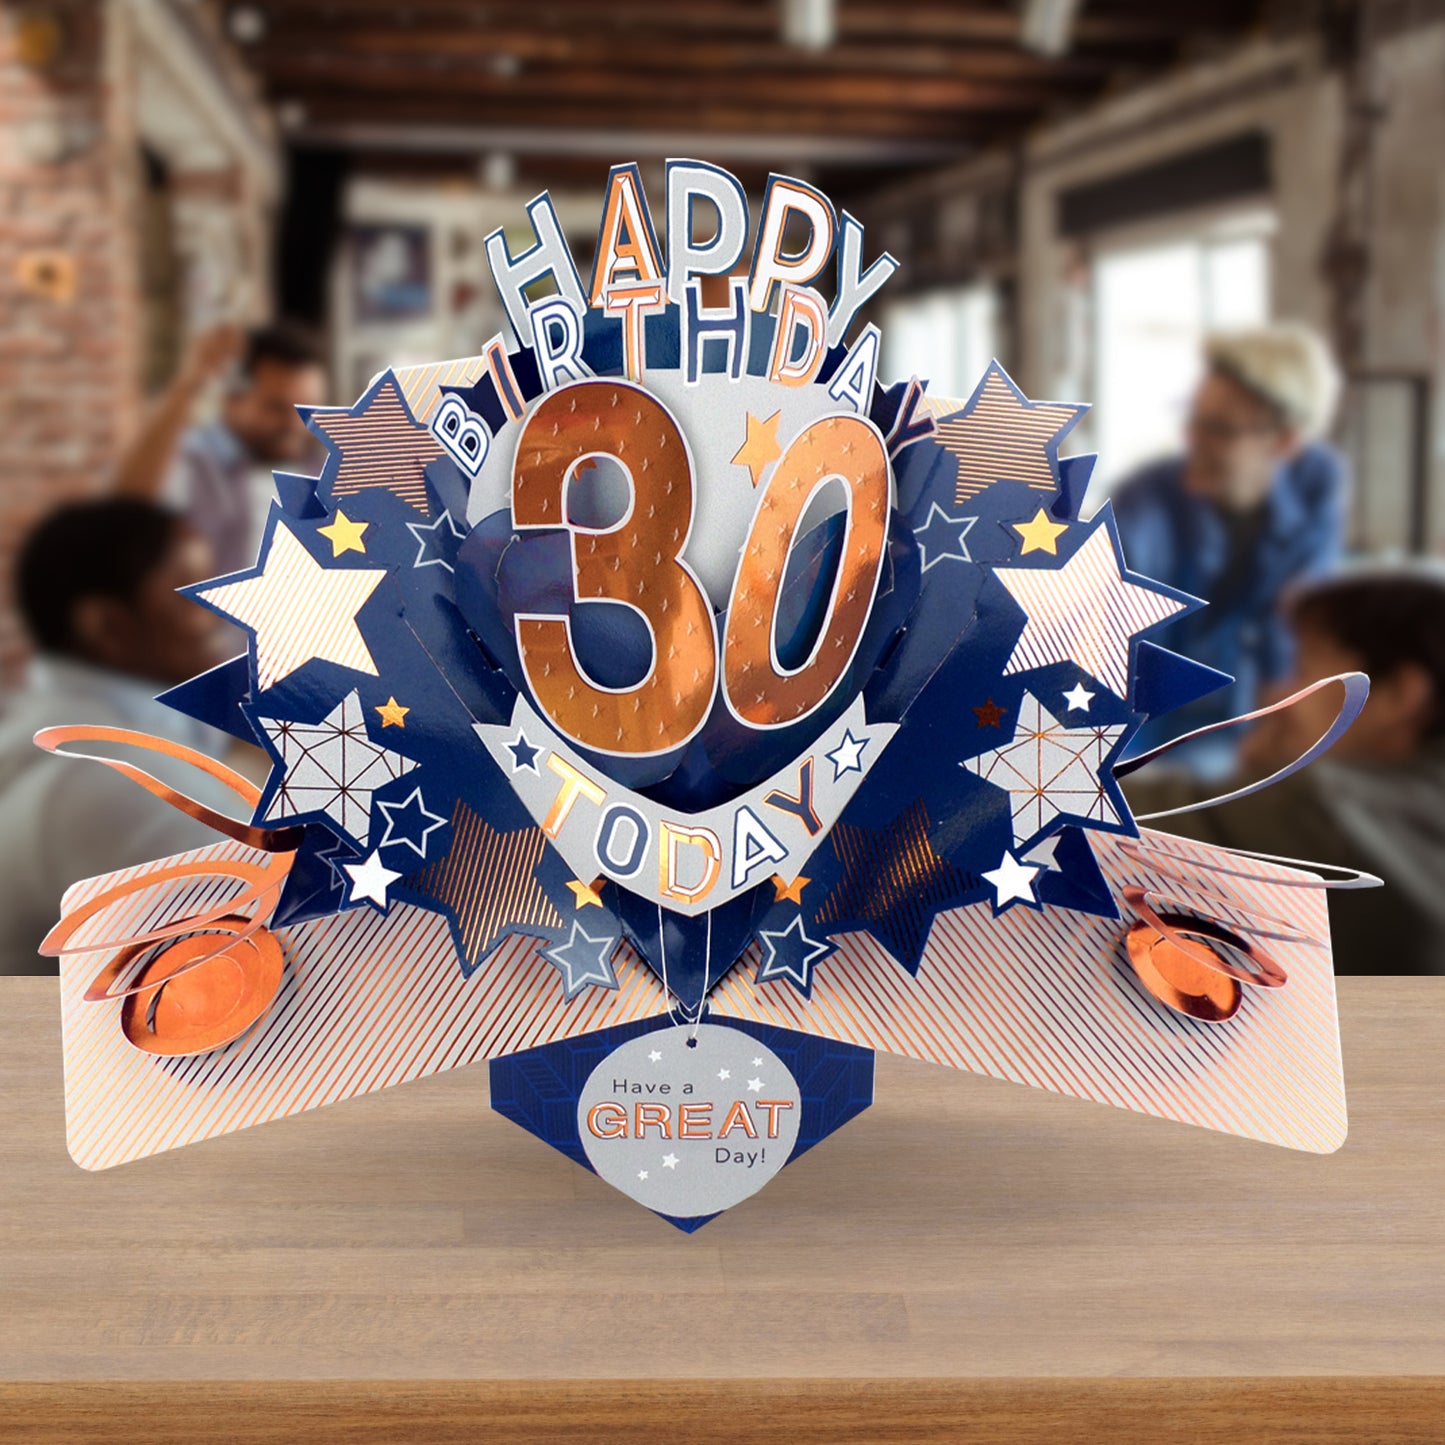 30th Birthday Pop Up Card & Musical Balloon Surprise Delivered In A Box For Him